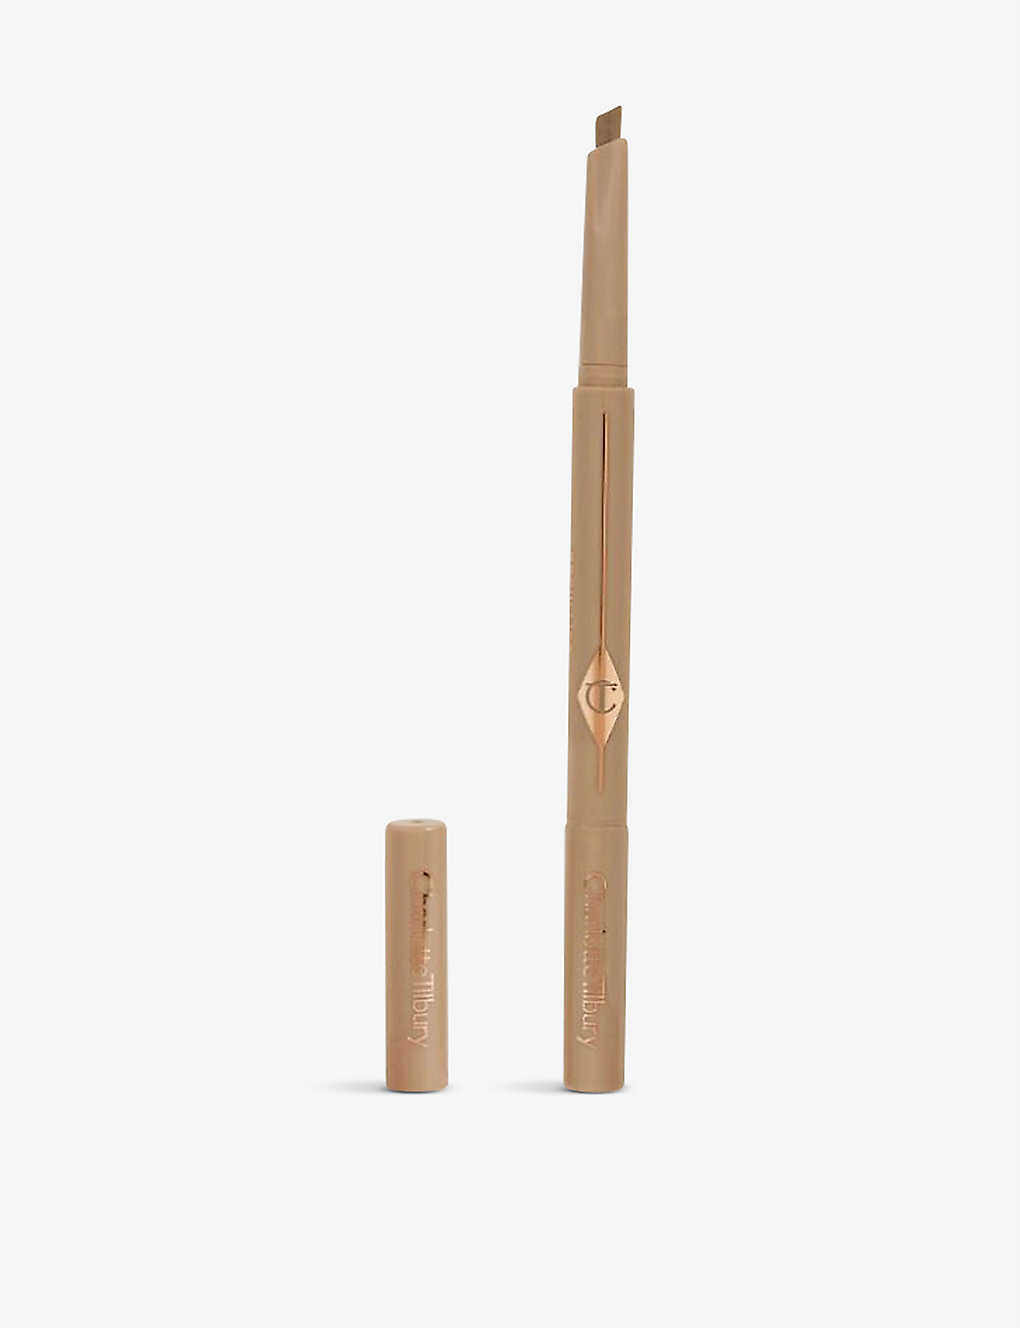 Charlotte Tilbury Brow Lift Eyebrow Pencil In Taupe